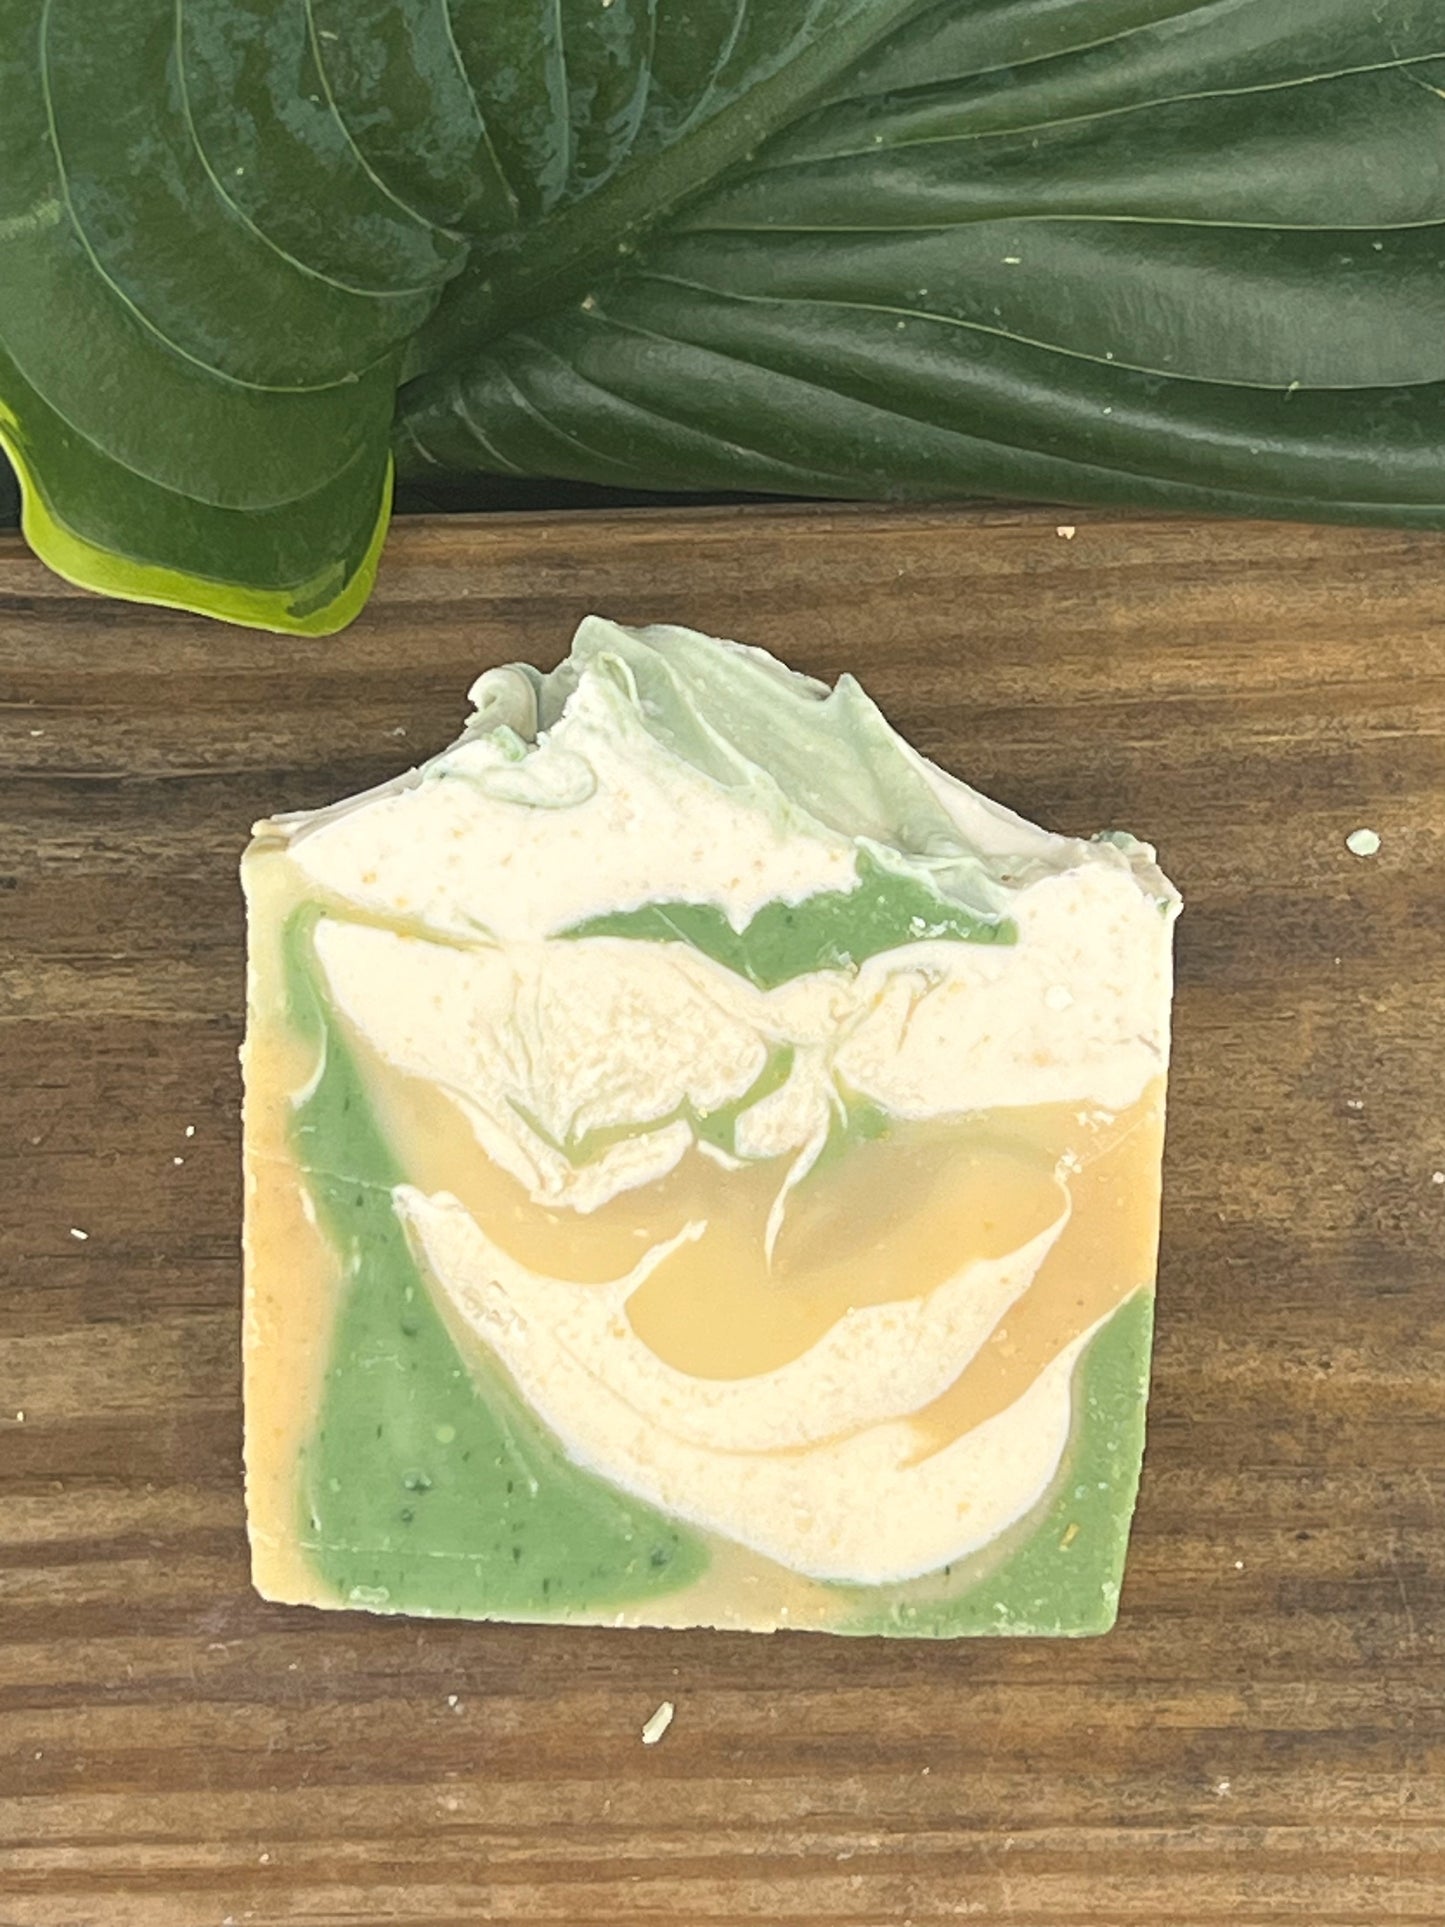 Dill Pickle Goat Milk and Honey Soap